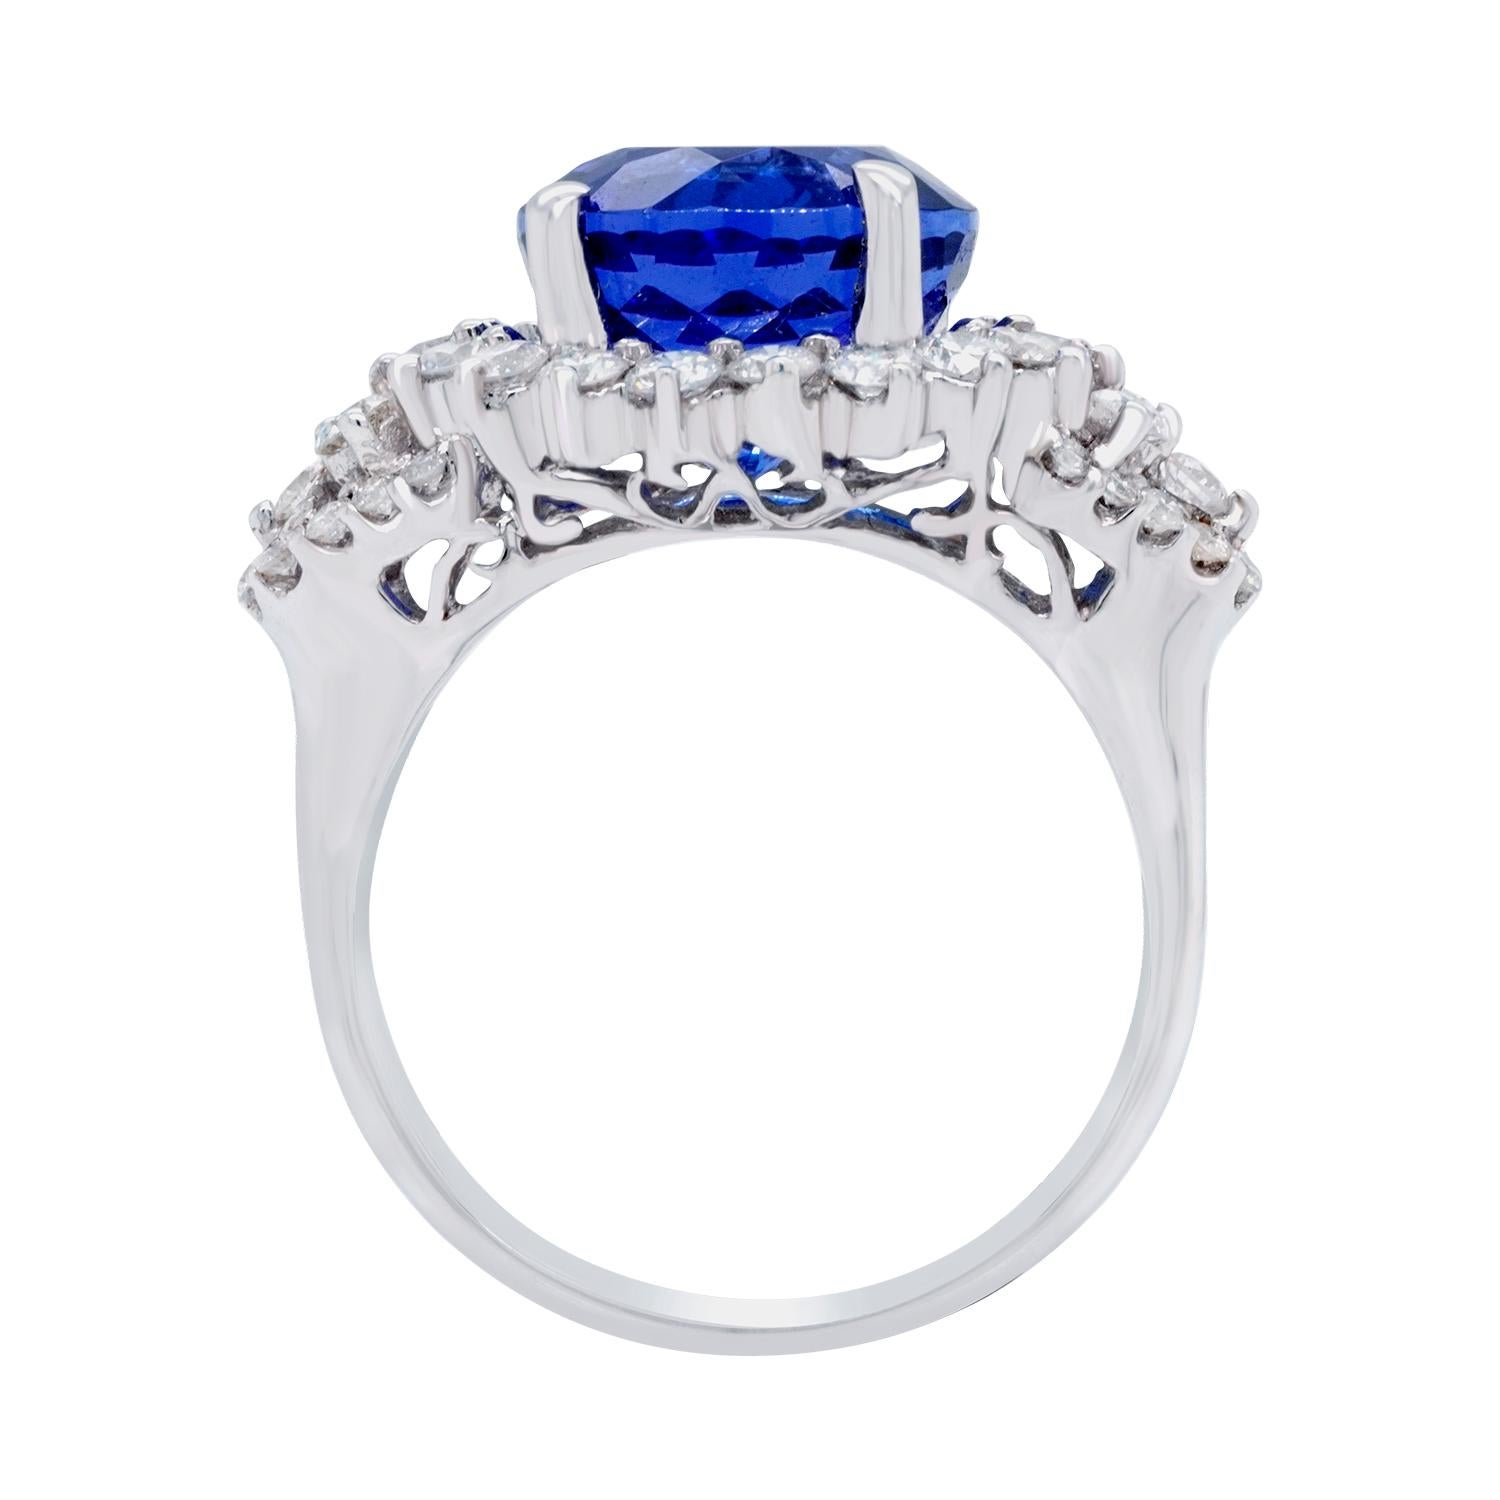 This striking ring is shaped to resemble the sun, with each and every facet of the ring branching outwards from the point of the stone outwards, like the rays of the sun. Set with a 5.90 ct Tanzanite and 0.99 carats of diamonds showcase the